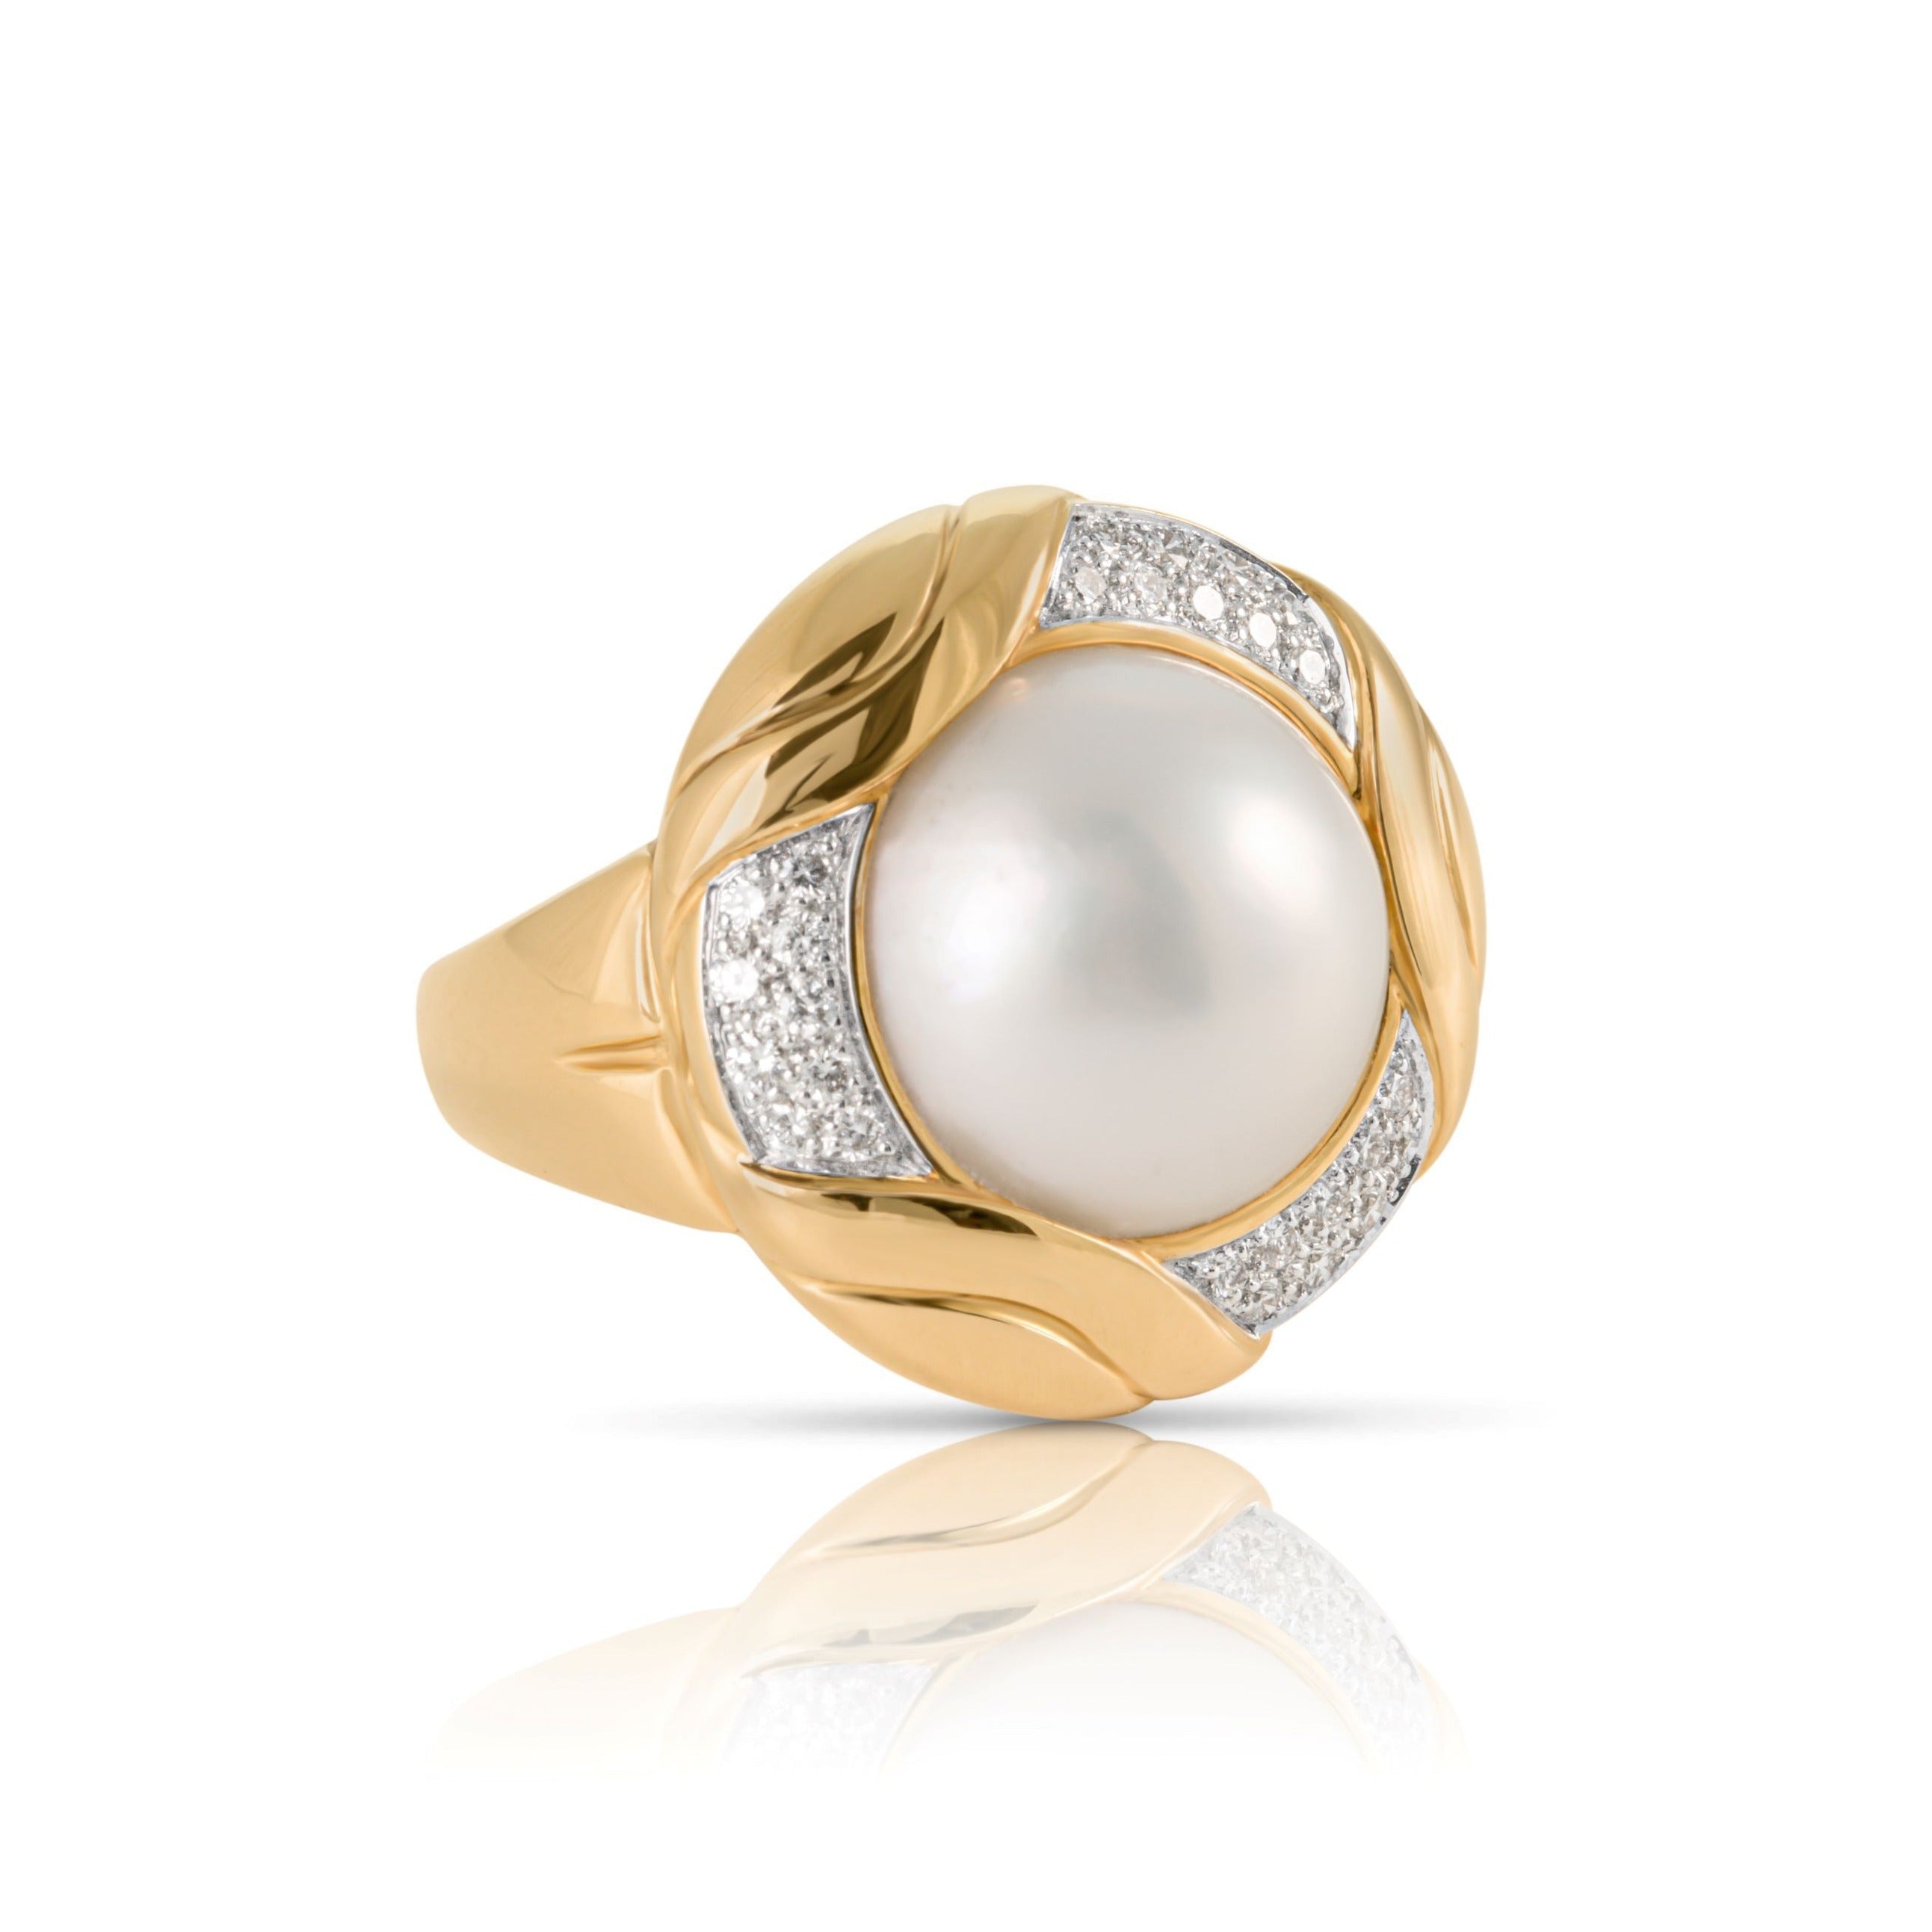 Vintage mabé pearl ring in 18ct gold and diamonds.